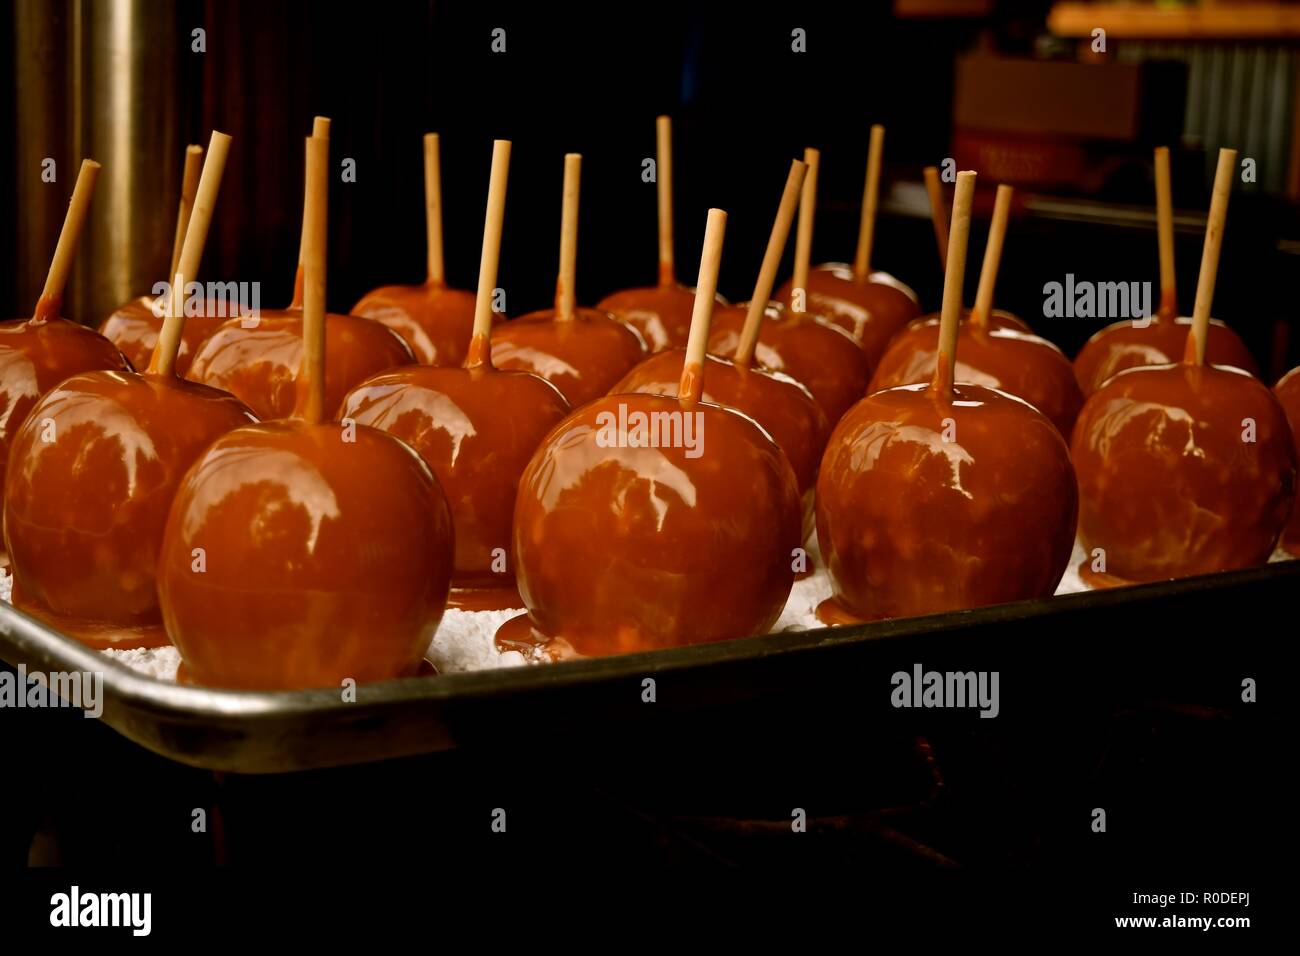 Autumn fresh picked Washington apples dipped in hot caramel making a delicious mouthwatering treat. Located in a farm in Snohomish, Washington, USA. Stock Photo